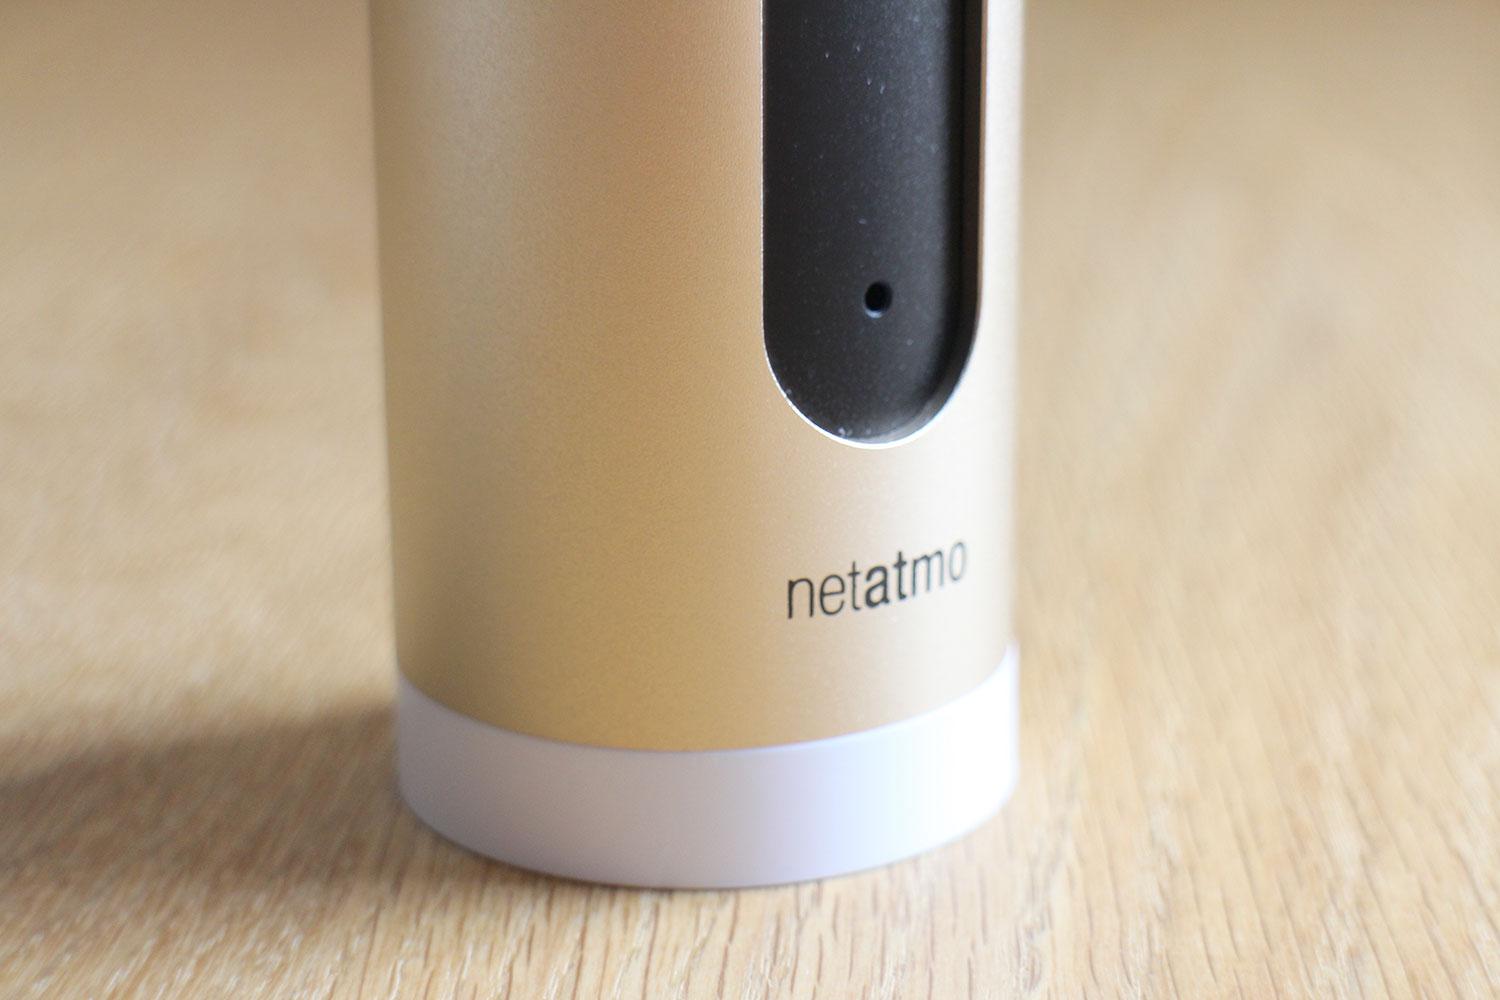 NETATMO Welcome Camera with Face Recognition